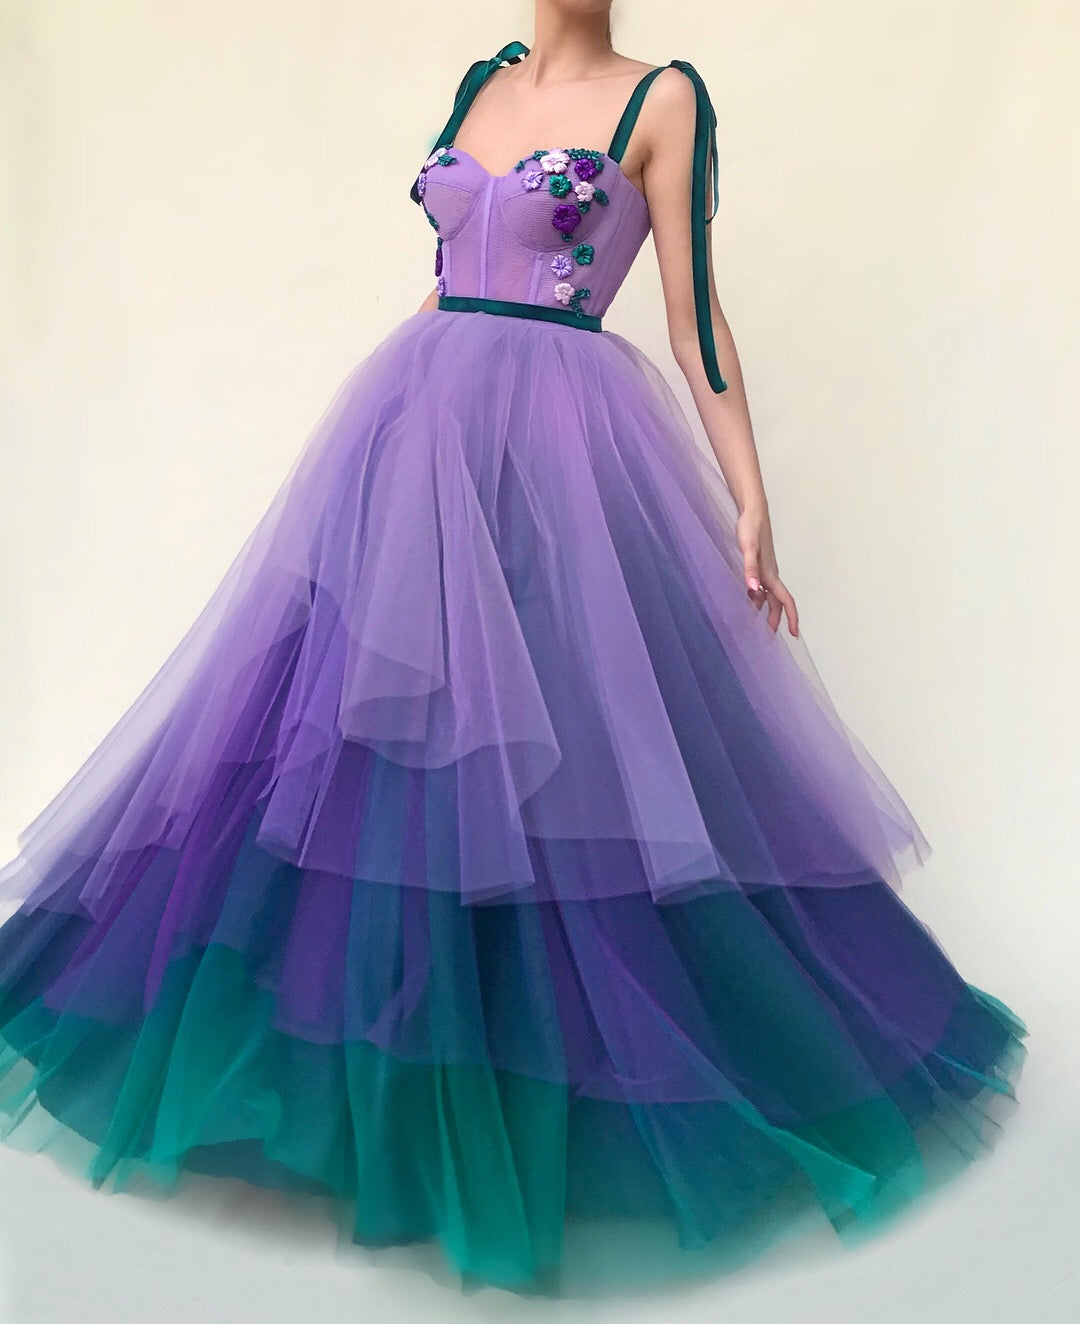 Purple A-Line dress with straps and embroidery